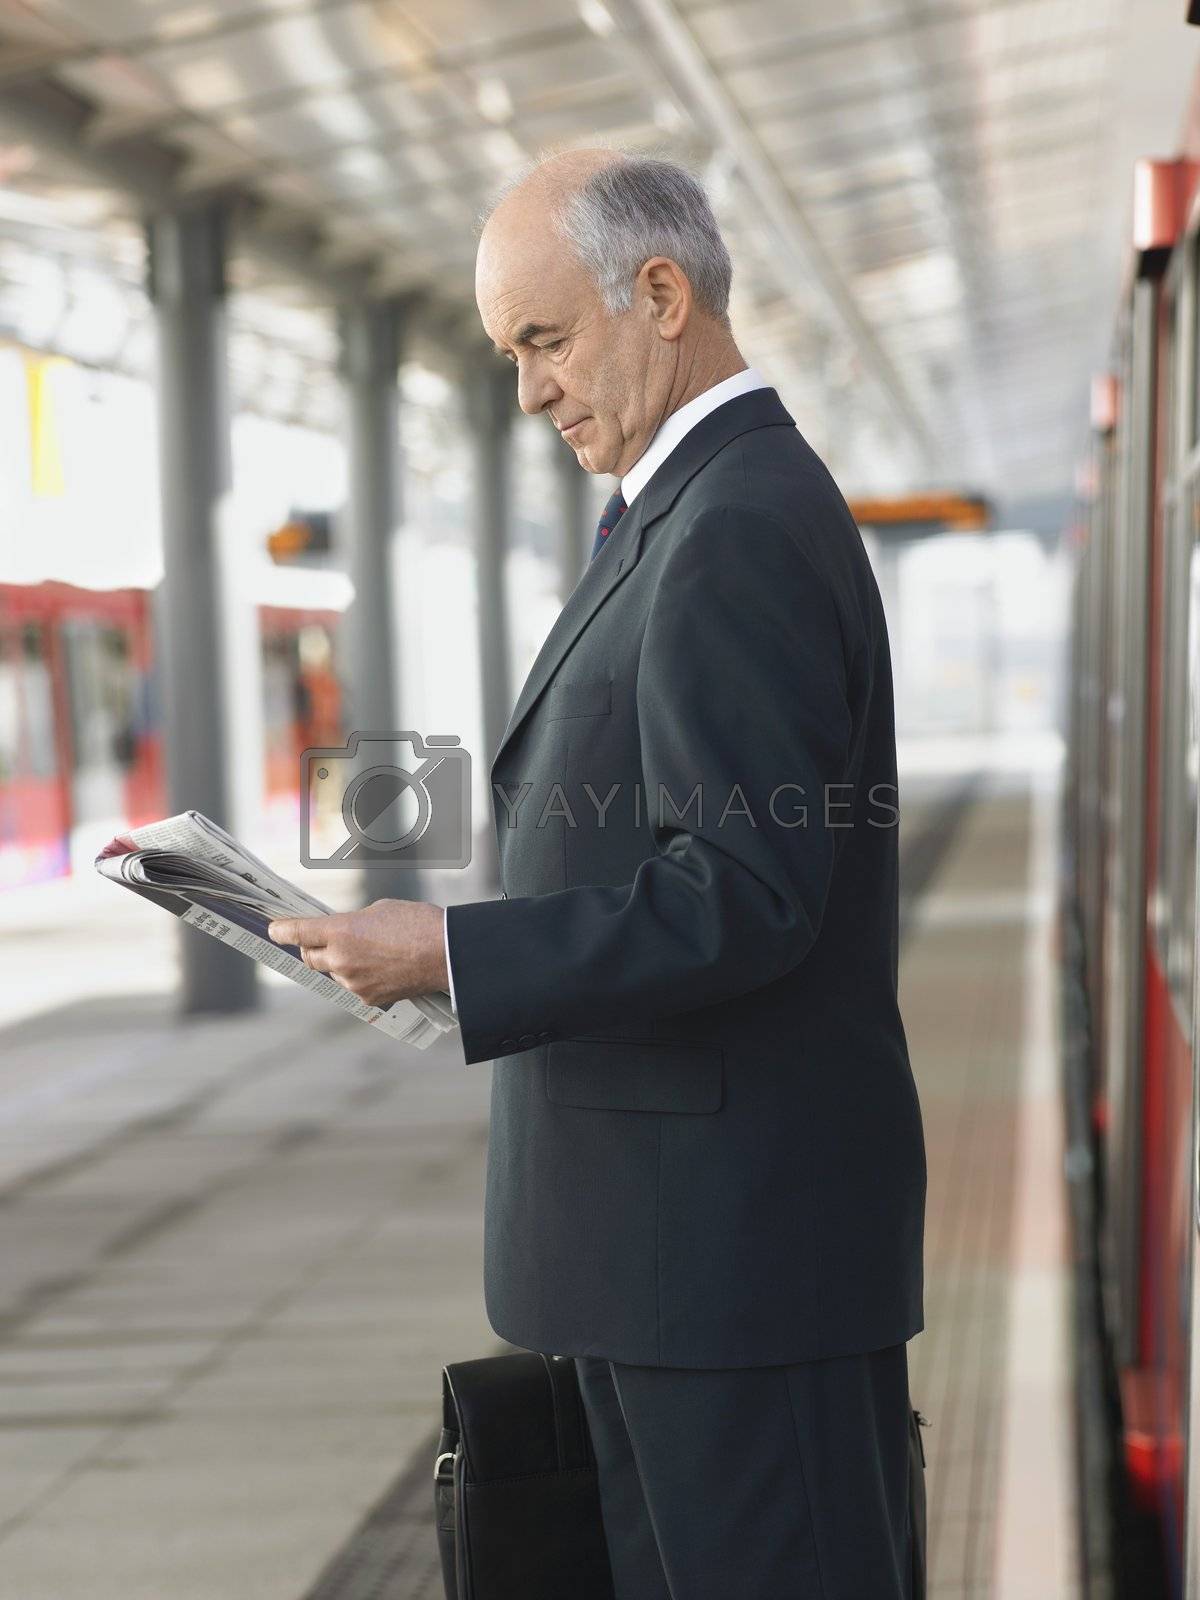 Royalty free image of Businessman Reading Newspaper at Train Station by moodboard